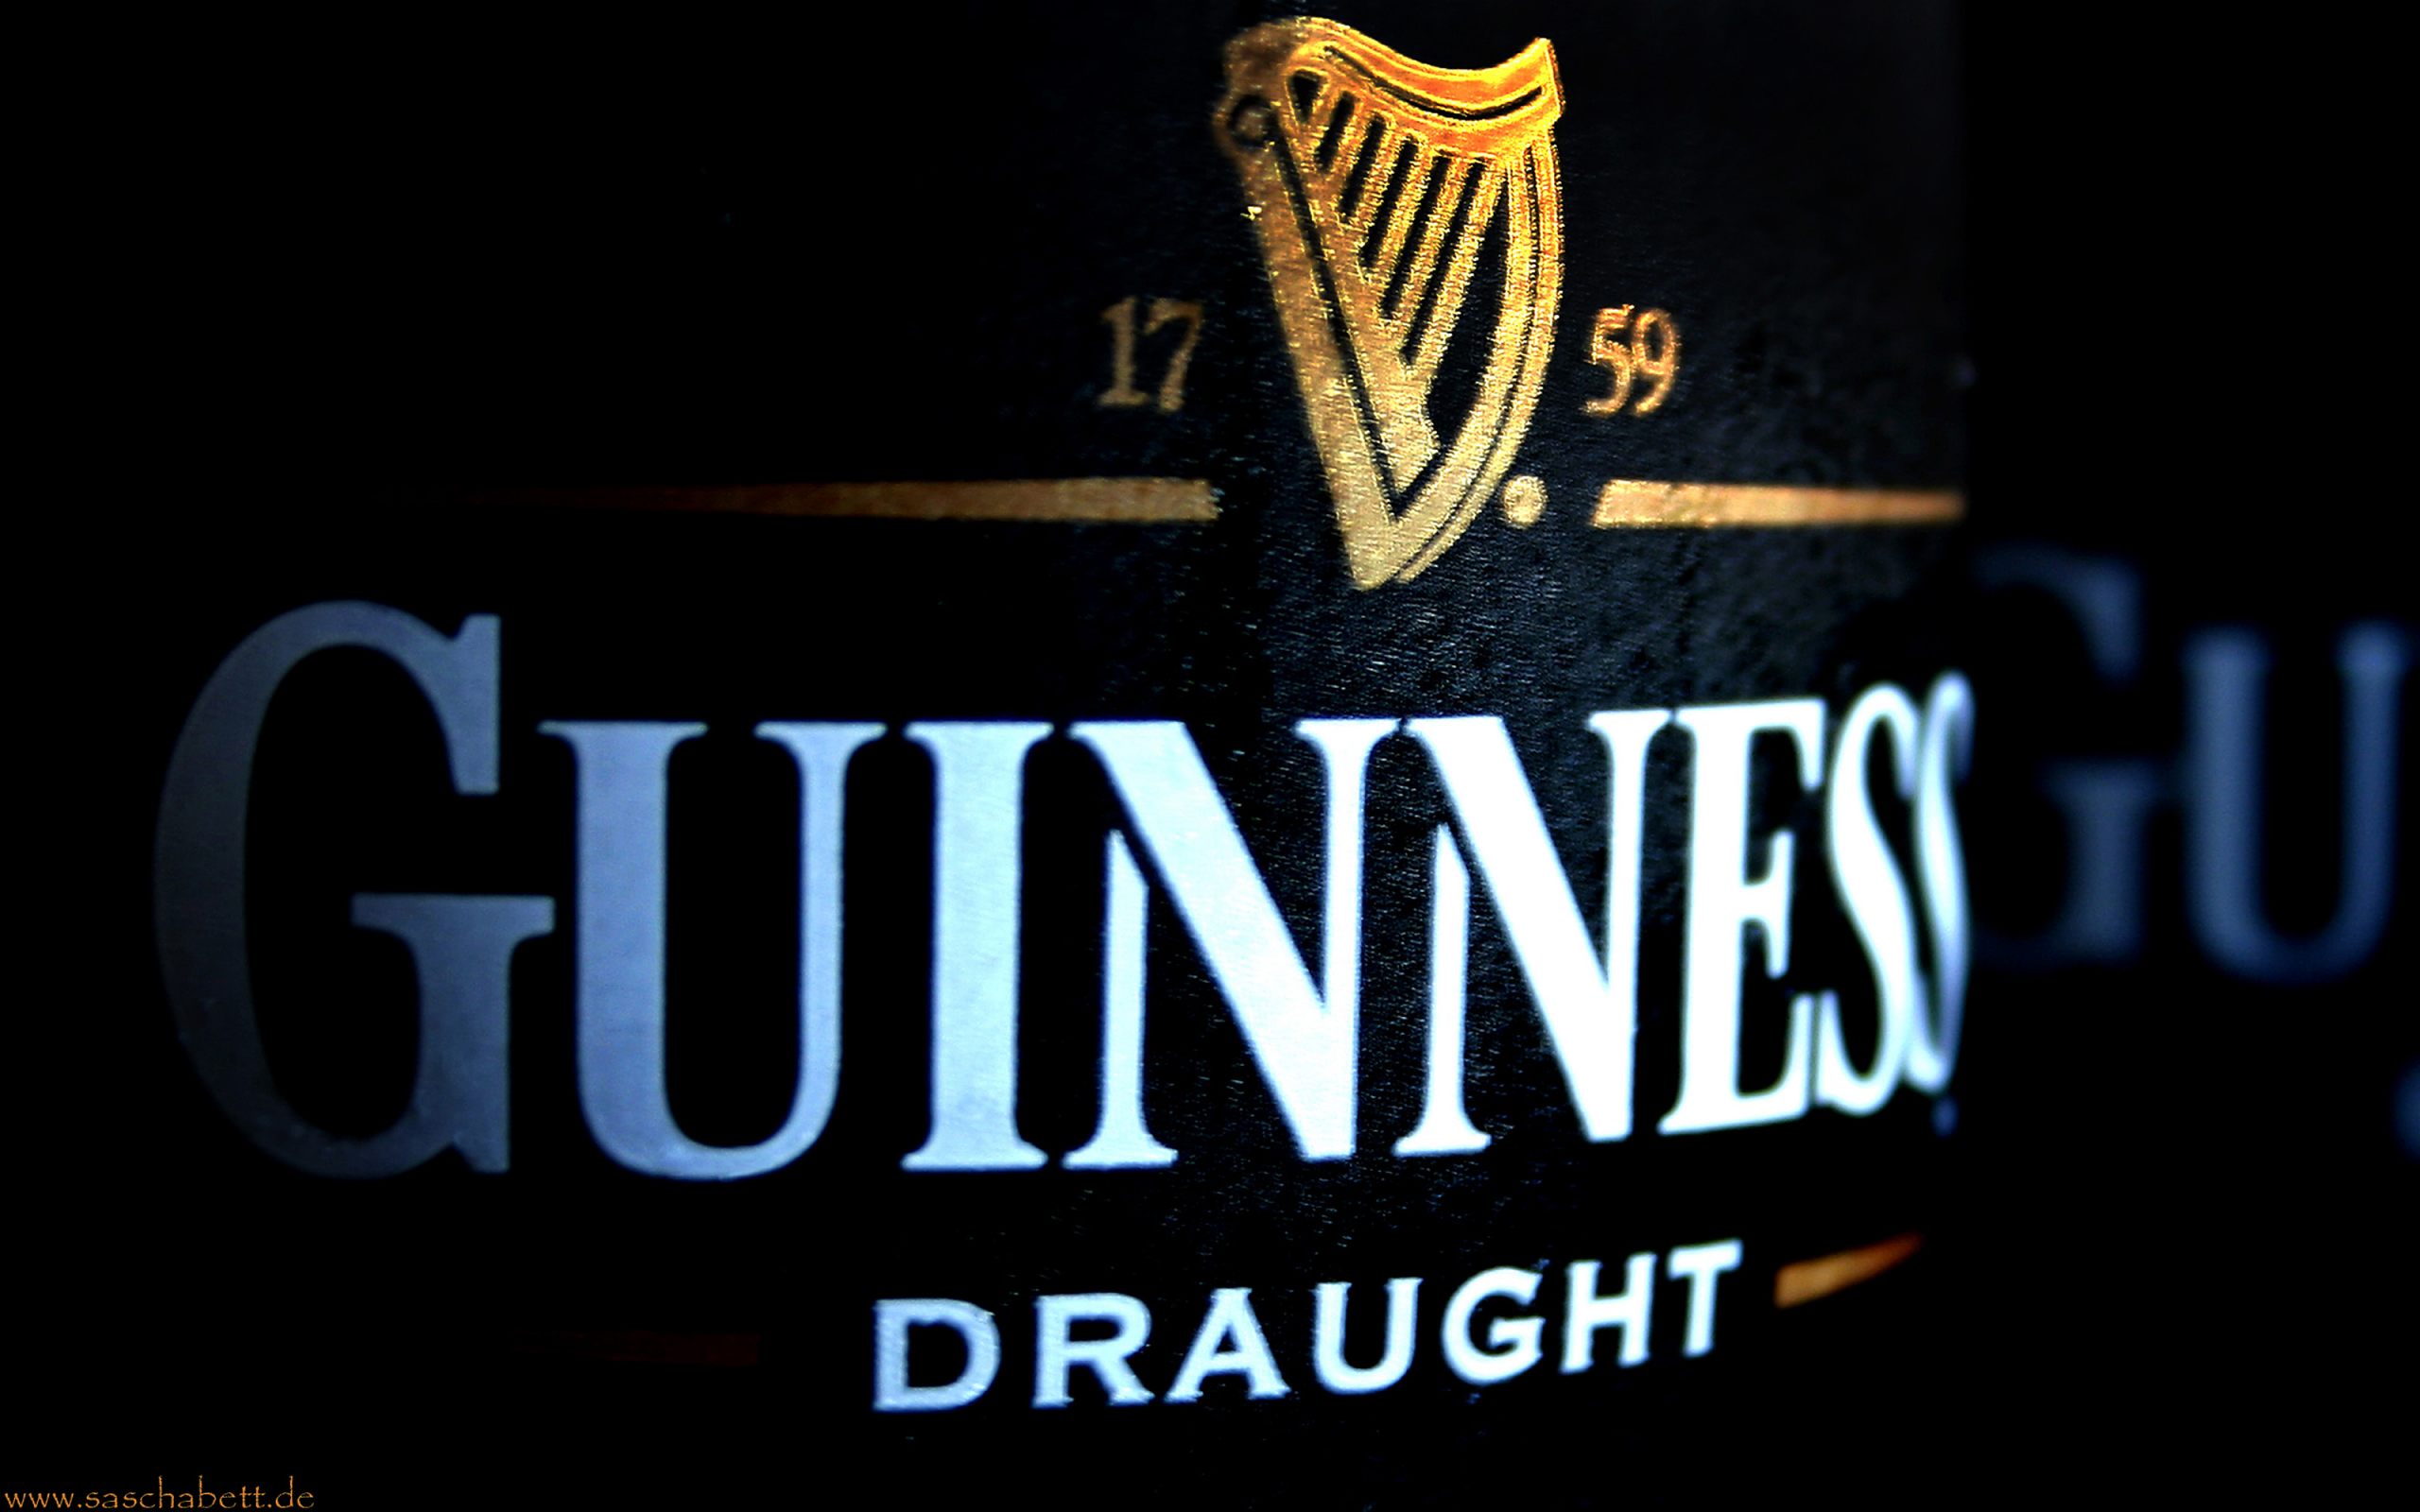 guinness, products wallpaper for mobile